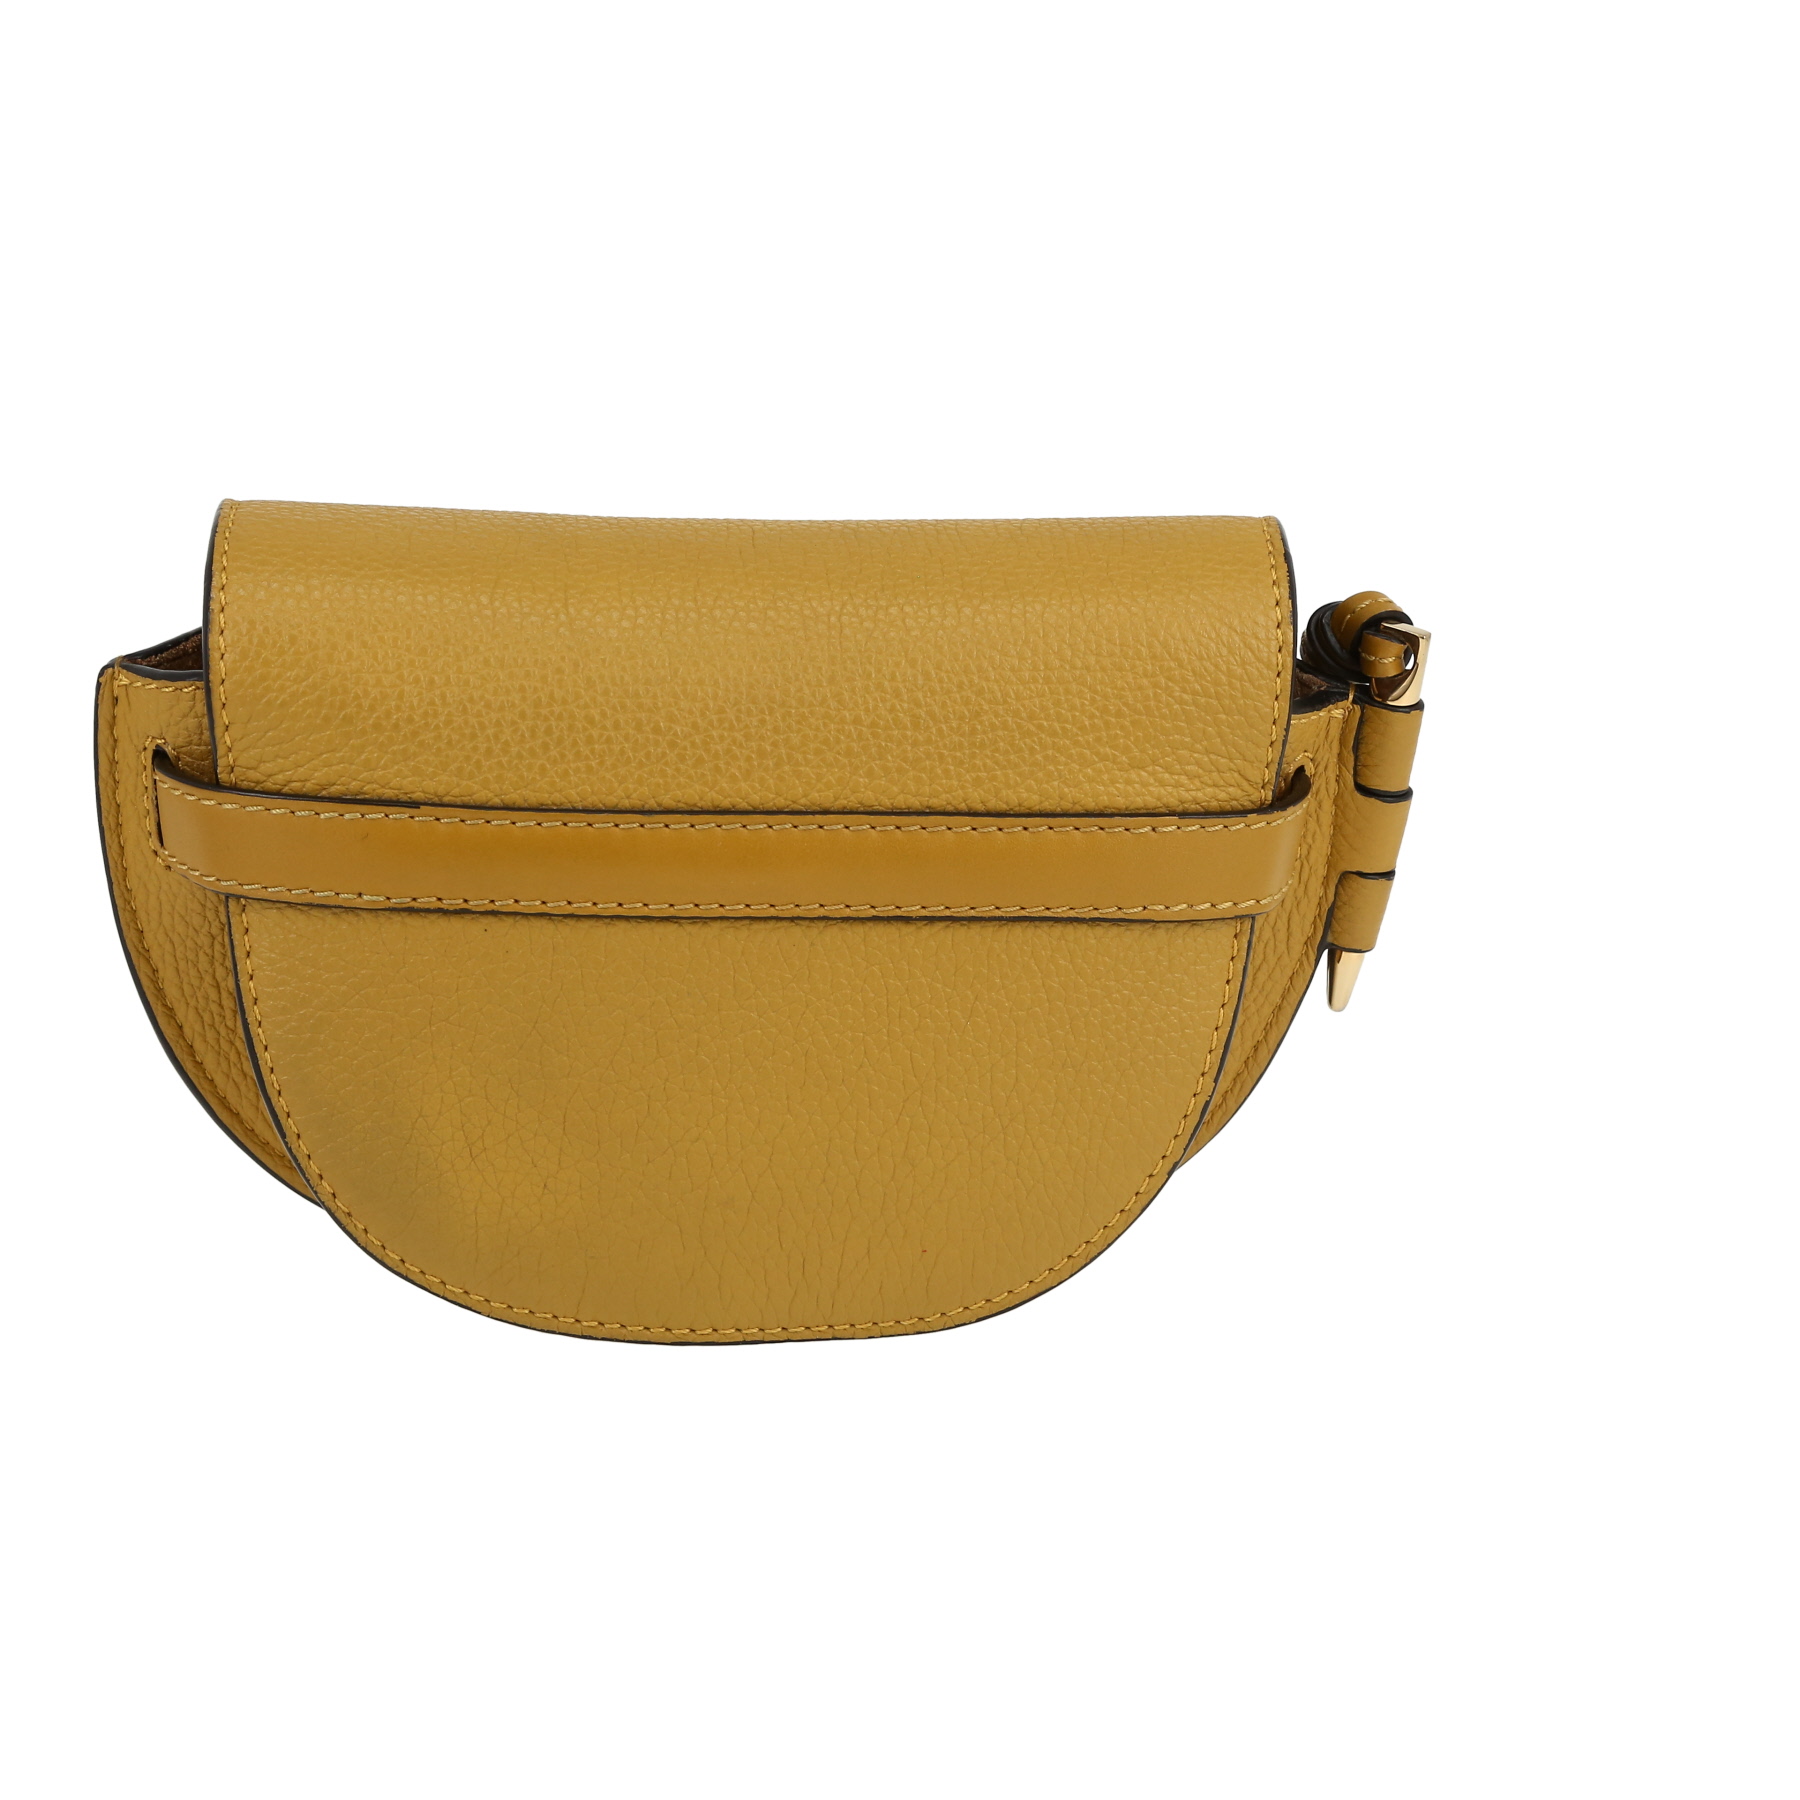 Gate Mini Shoulder Bag In Yellow Grained Leather